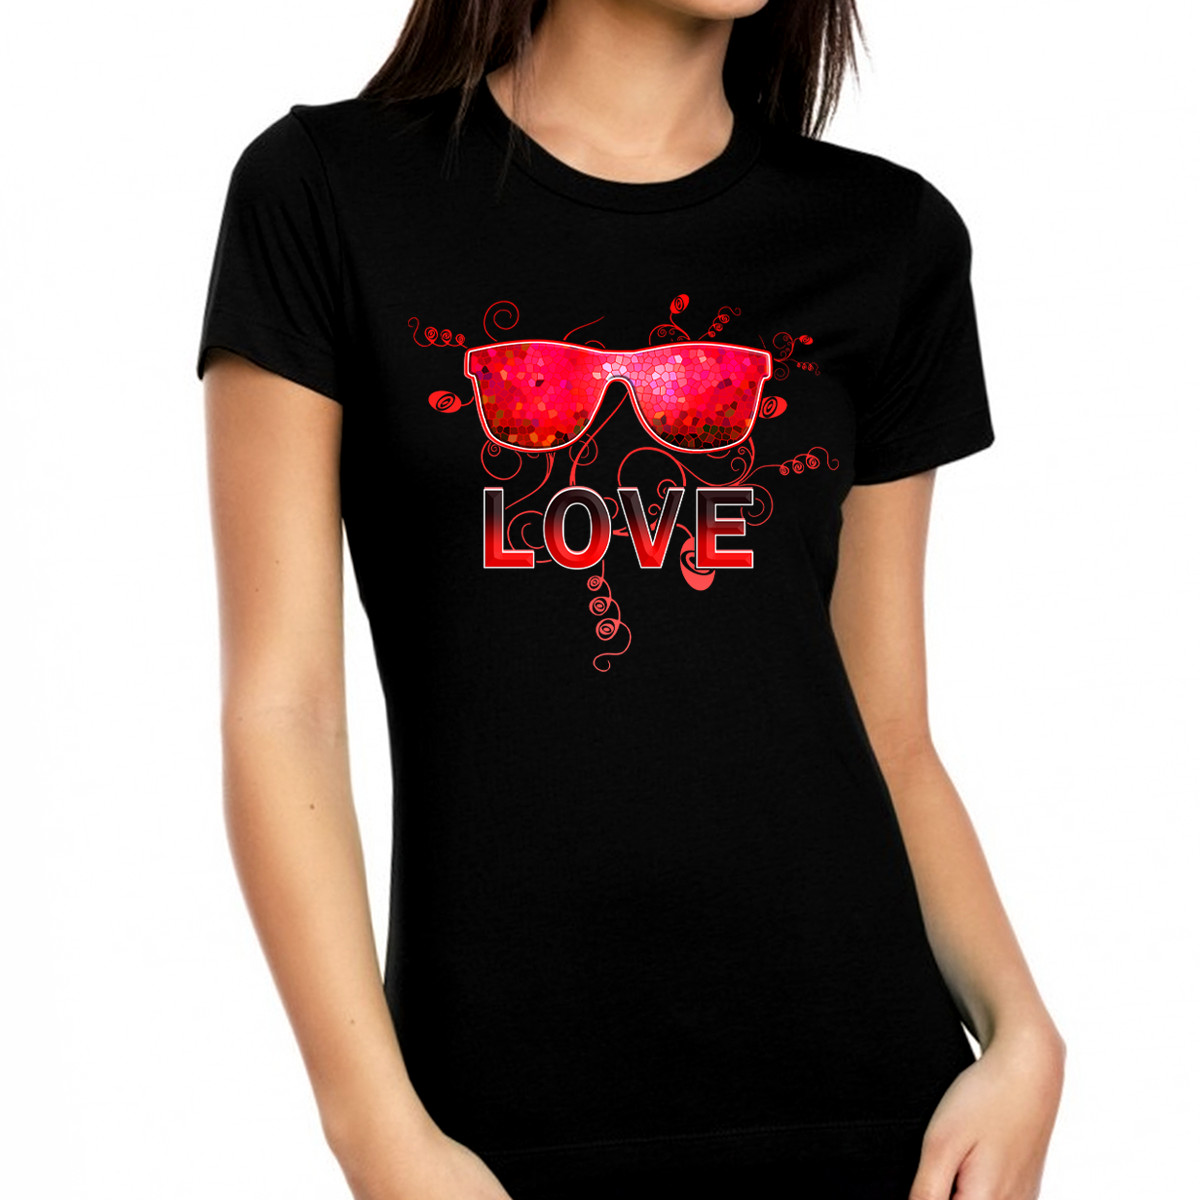 Valentines Day Shirt Ideas
 Fire Fit Designs Womens Valentines Day Shirts Women